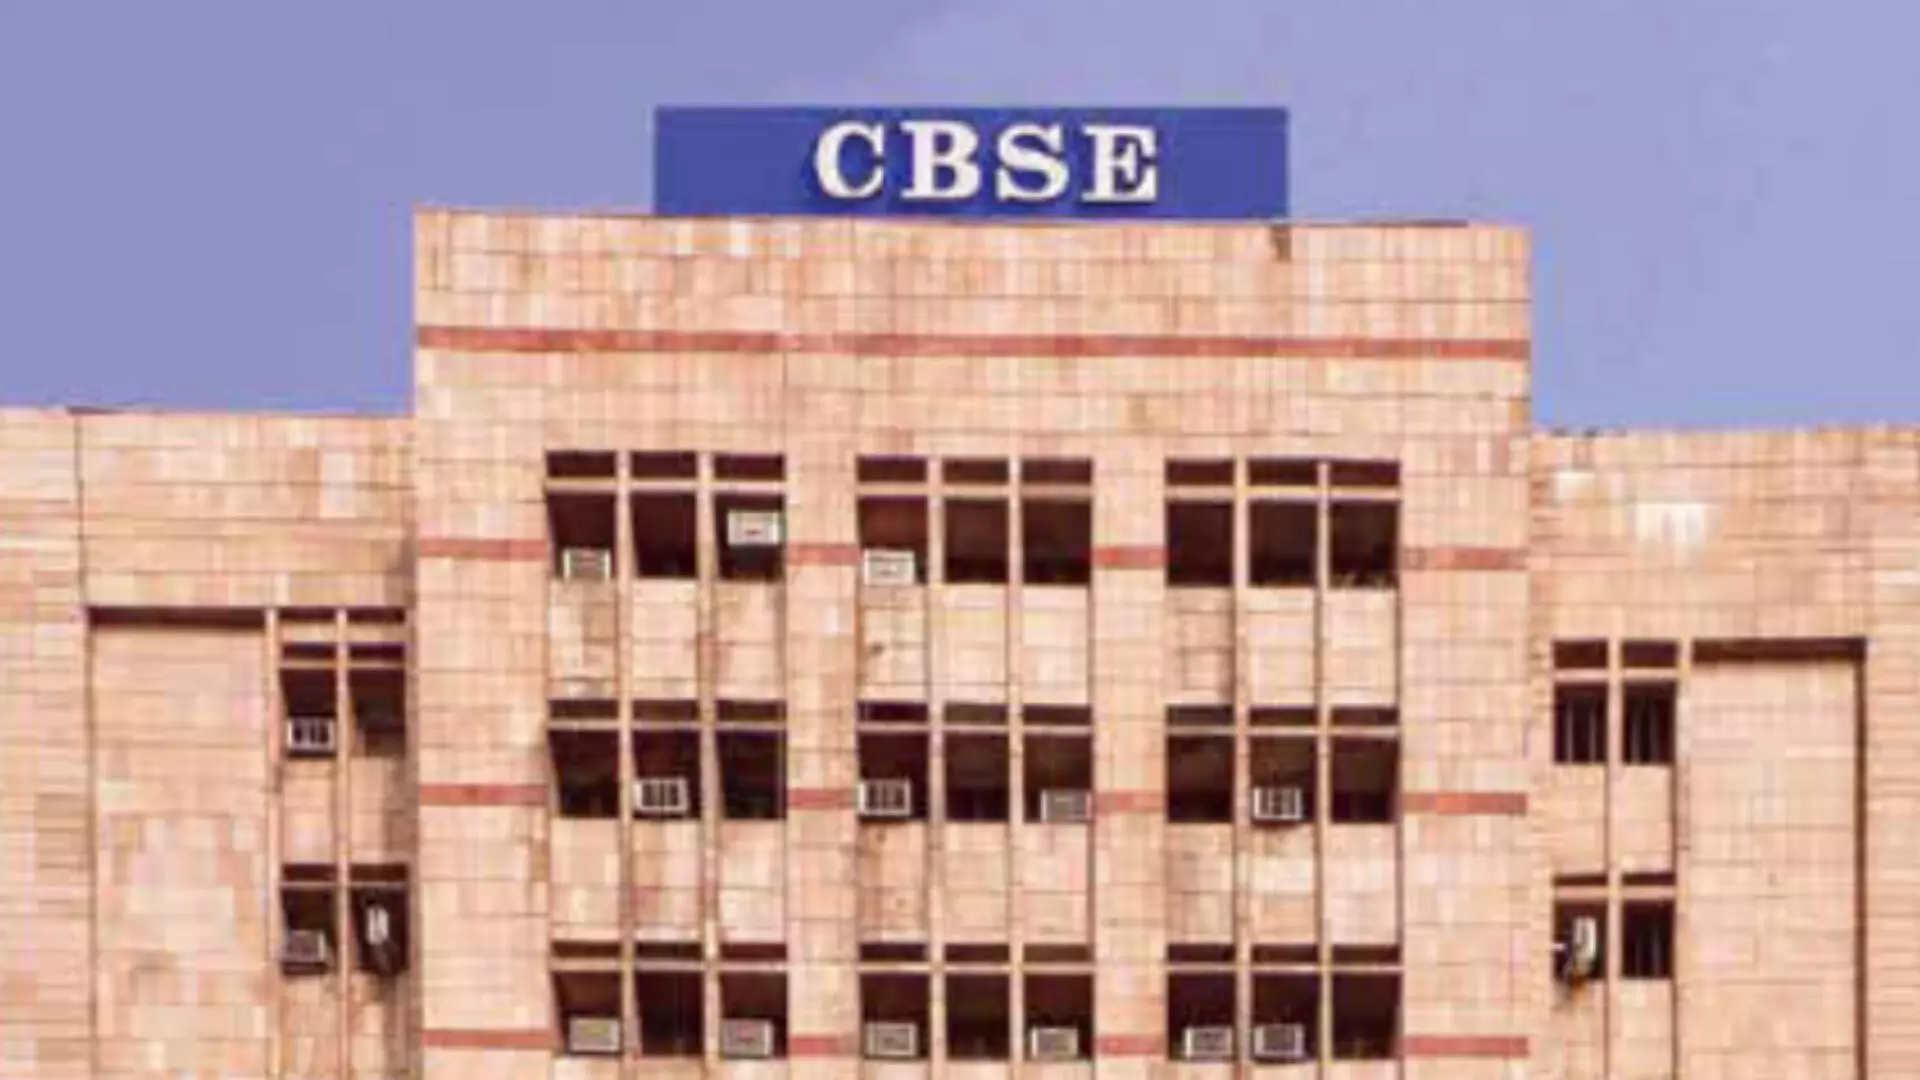 CBSE organizes science challenge program for class 8 to 10 students